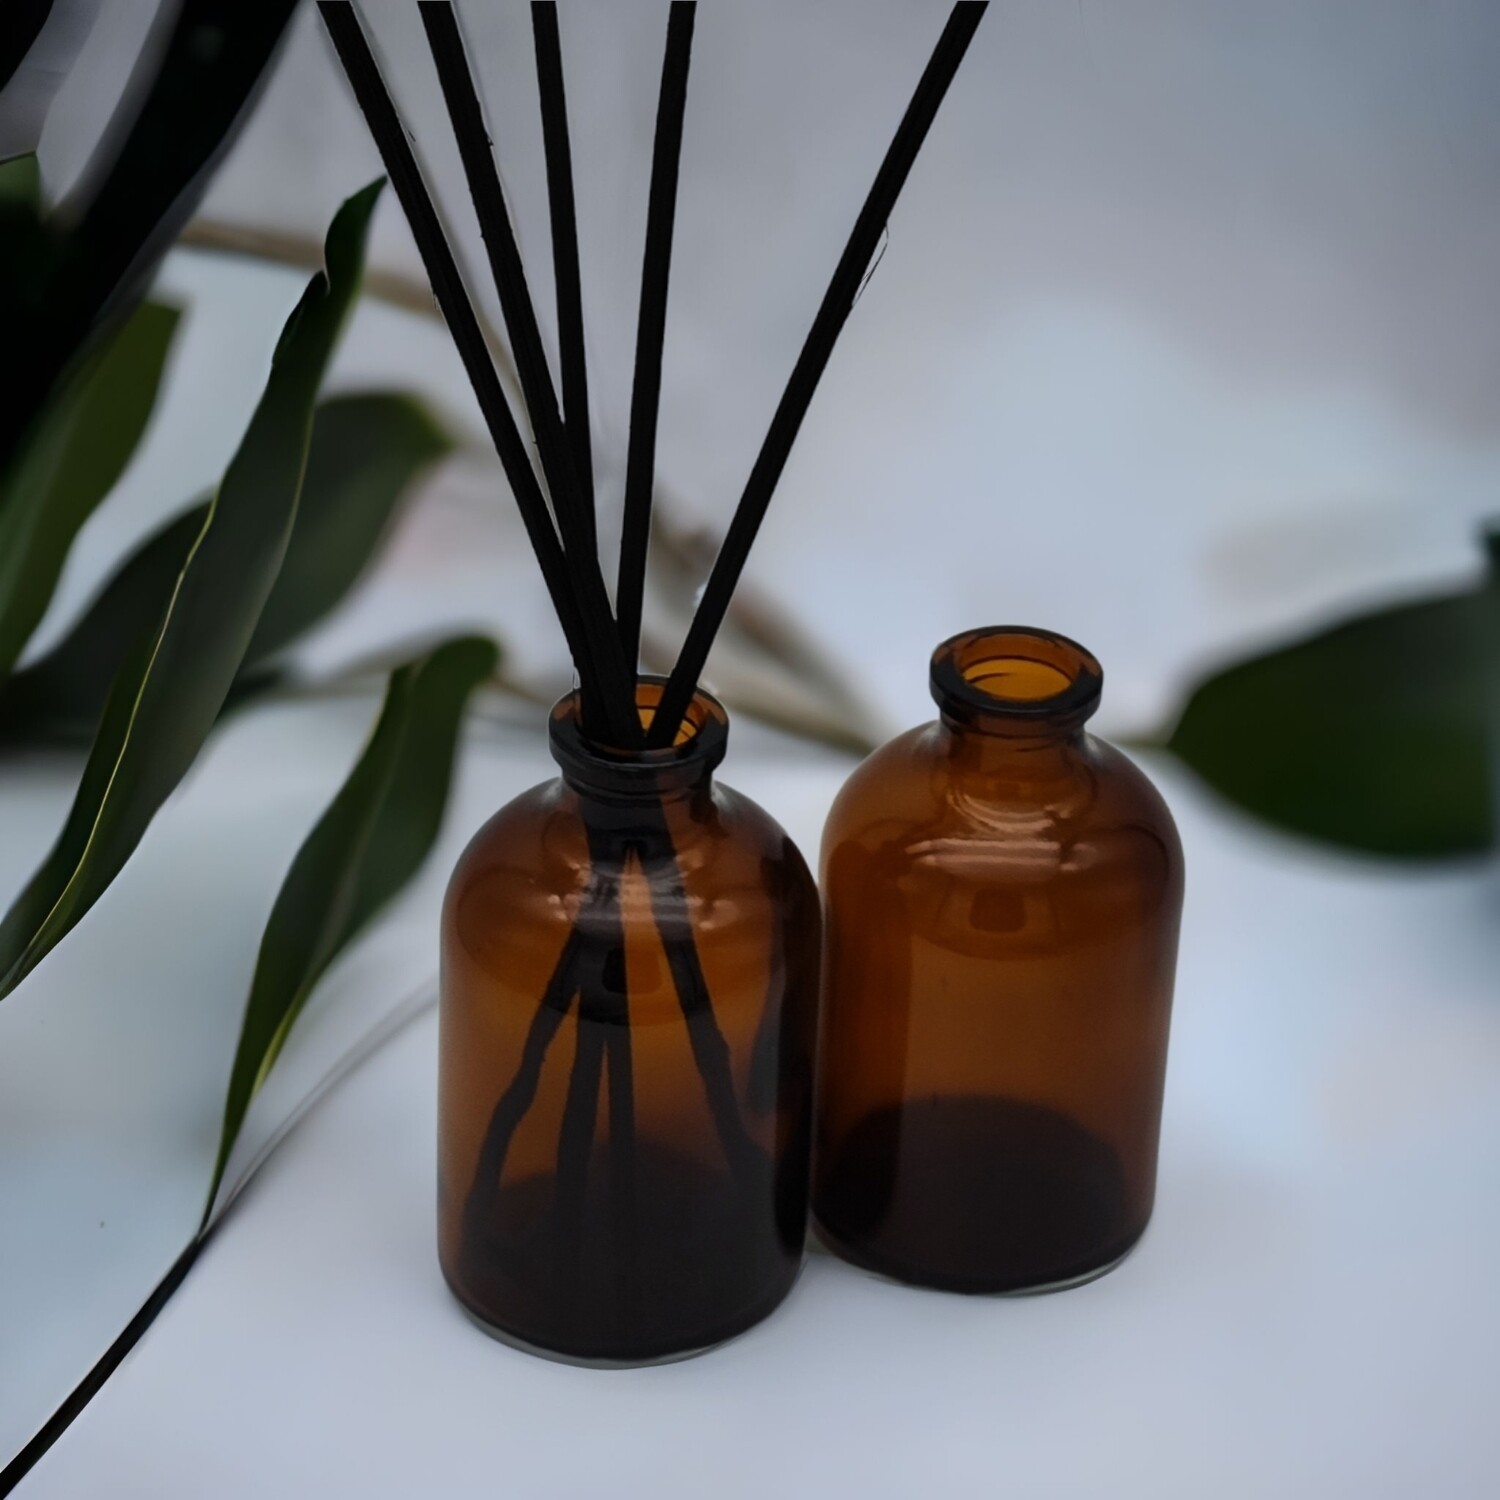 50mL AMBER GLASS Diffusers & 50 BLACK DIFFUSER STICKS - PACK of 10